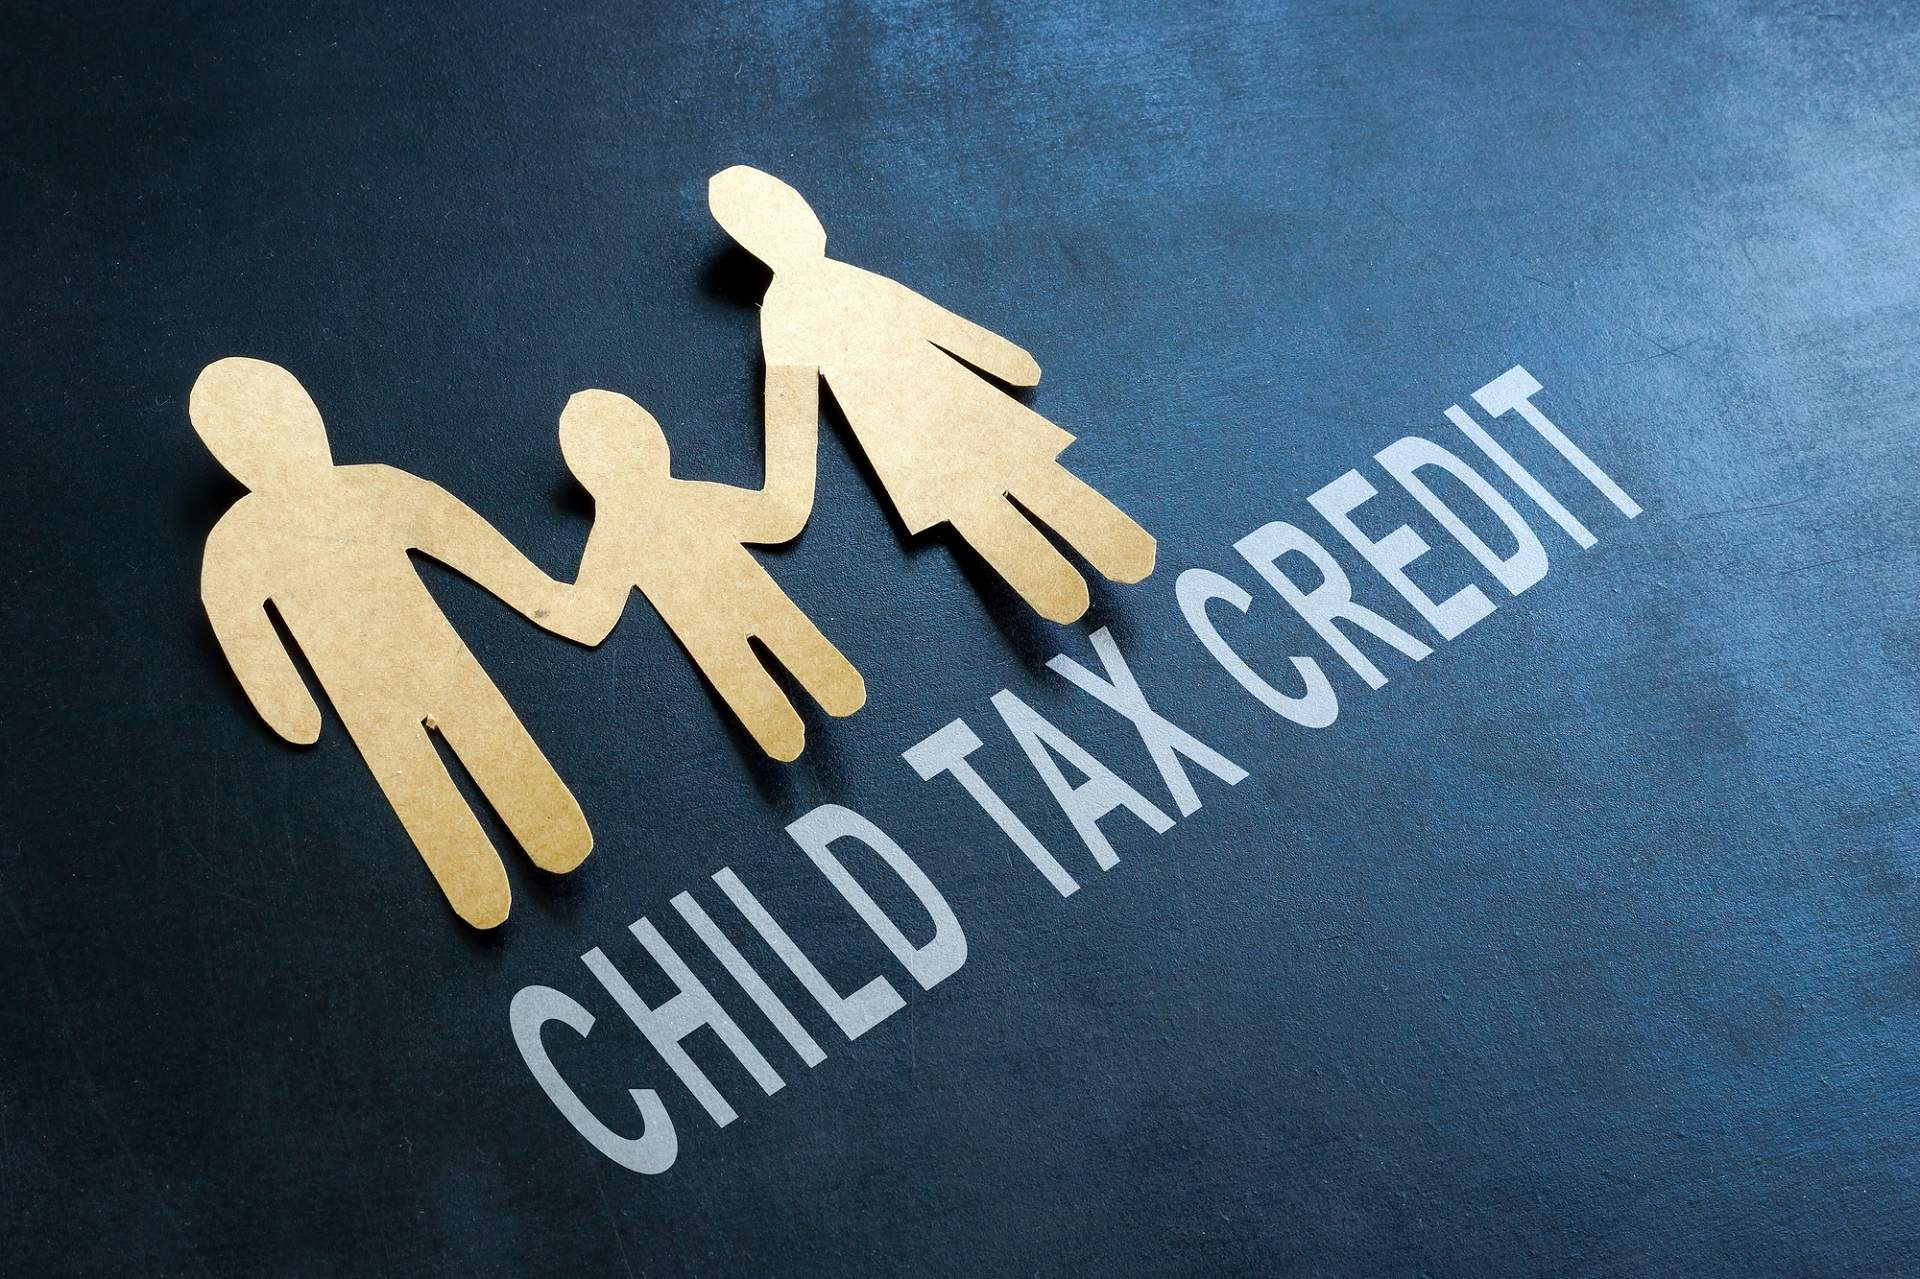 advance-child-tax-credit-payments-start-today-cook-co-news